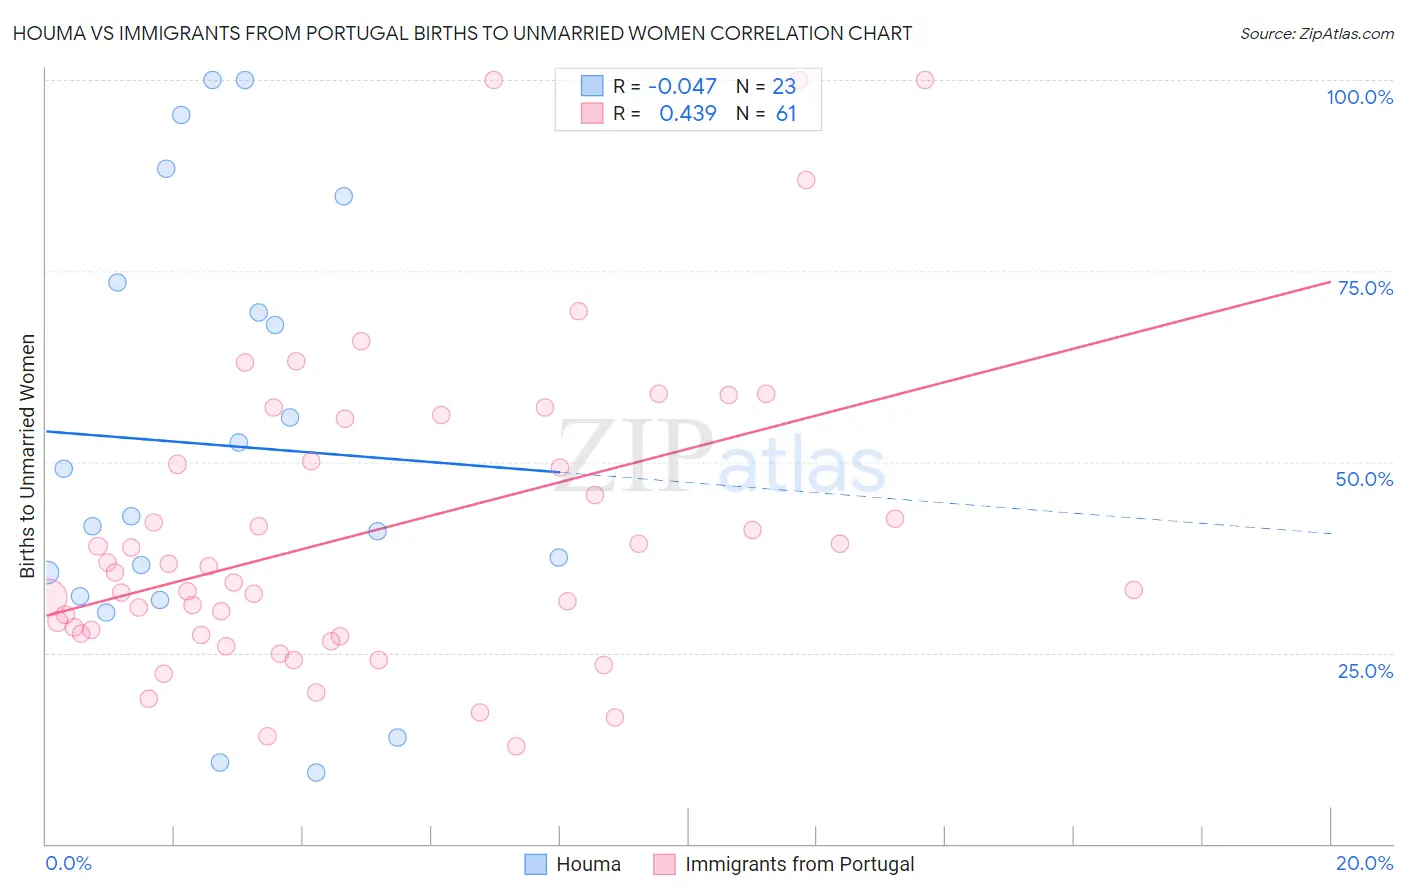 Houma vs Immigrants from Portugal Births to Unmarried Women